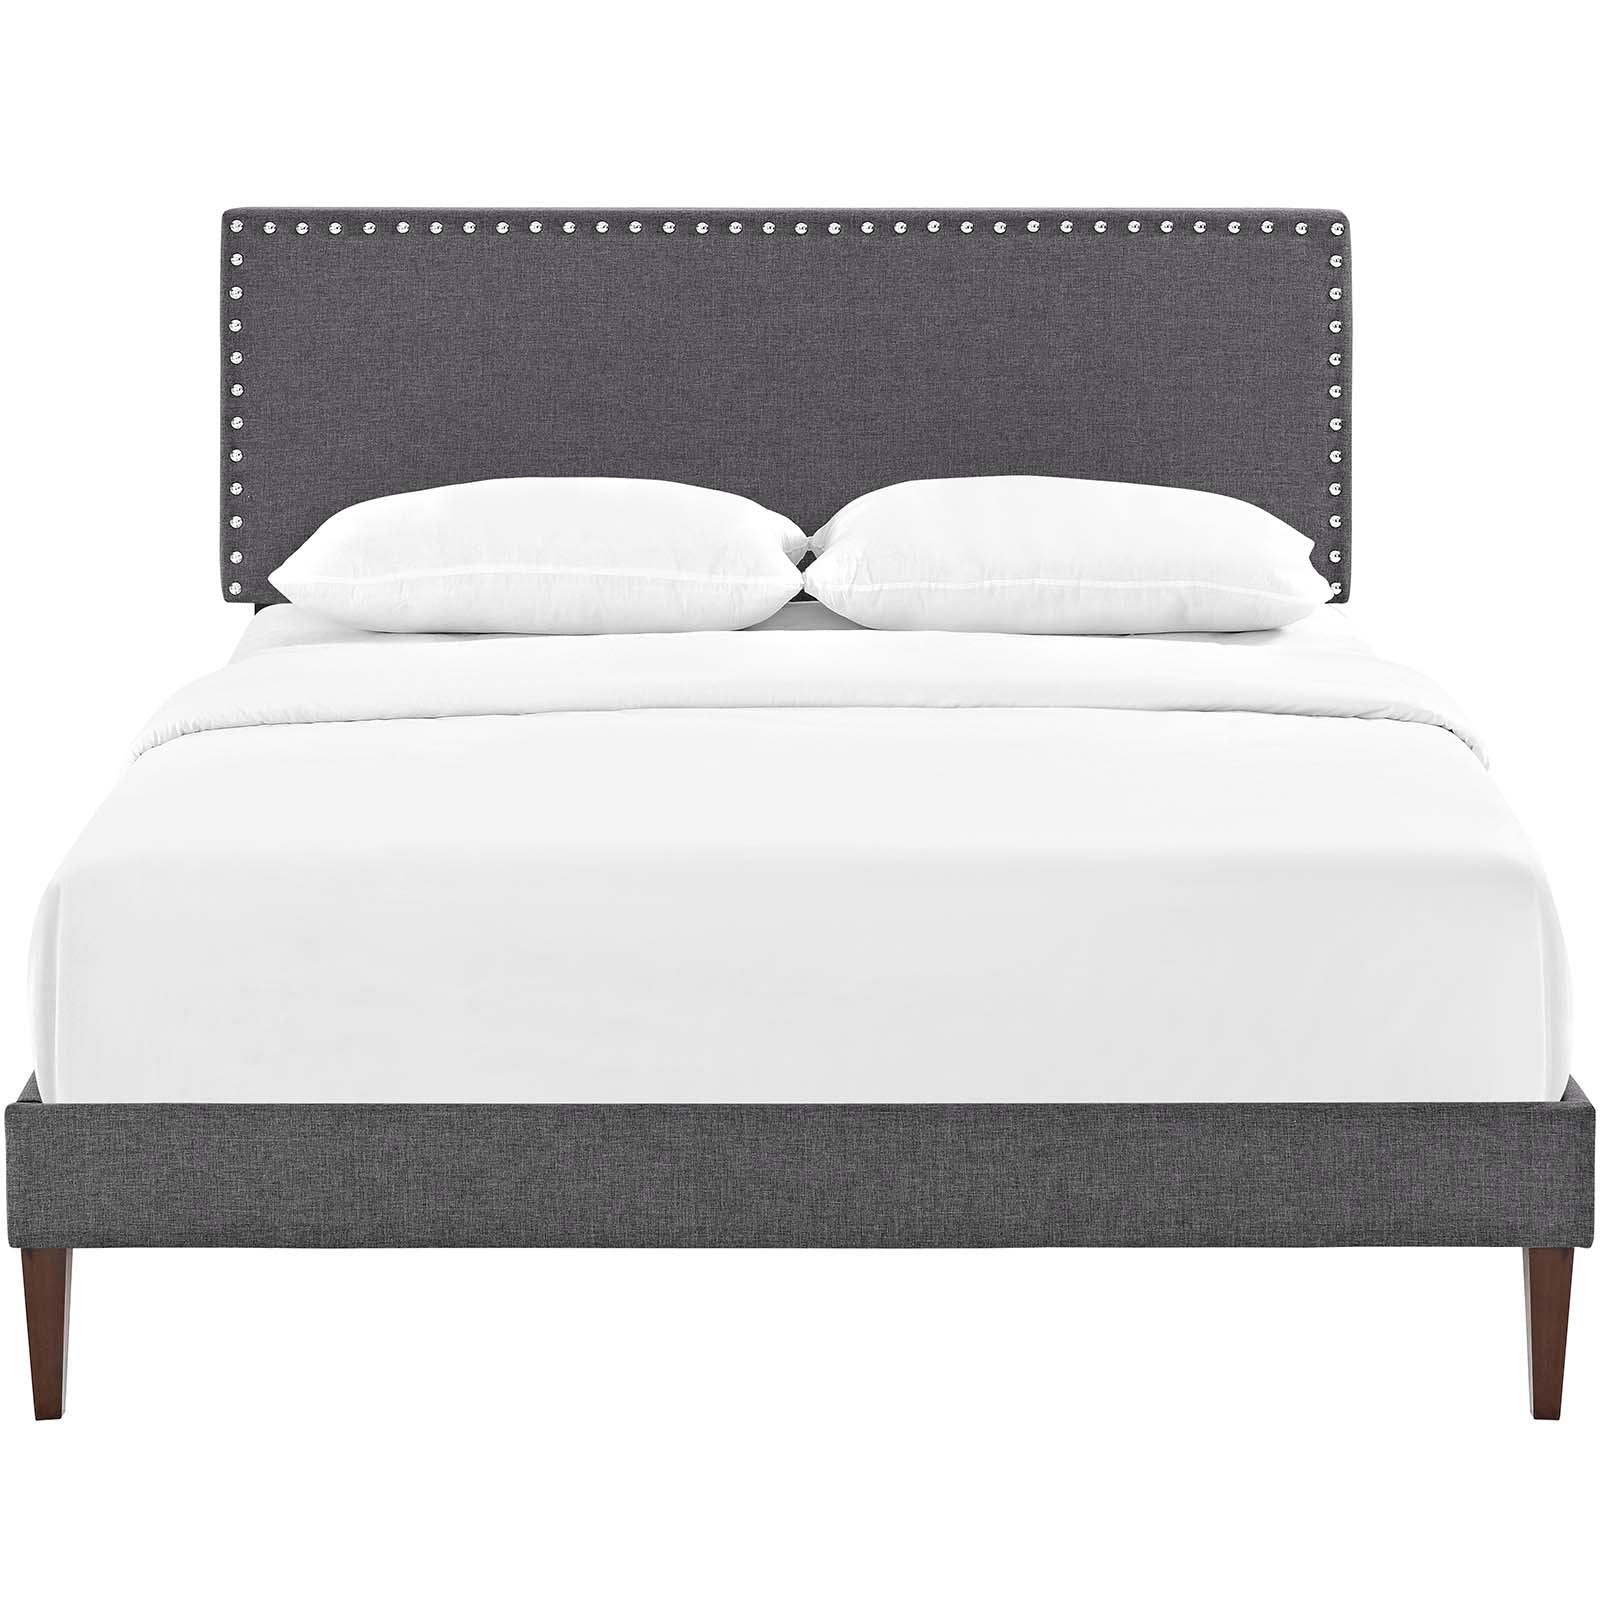 Macie Queen Fabric Platform Bed with Squared Tapered Legs - East Shore Modern Home Furnishings